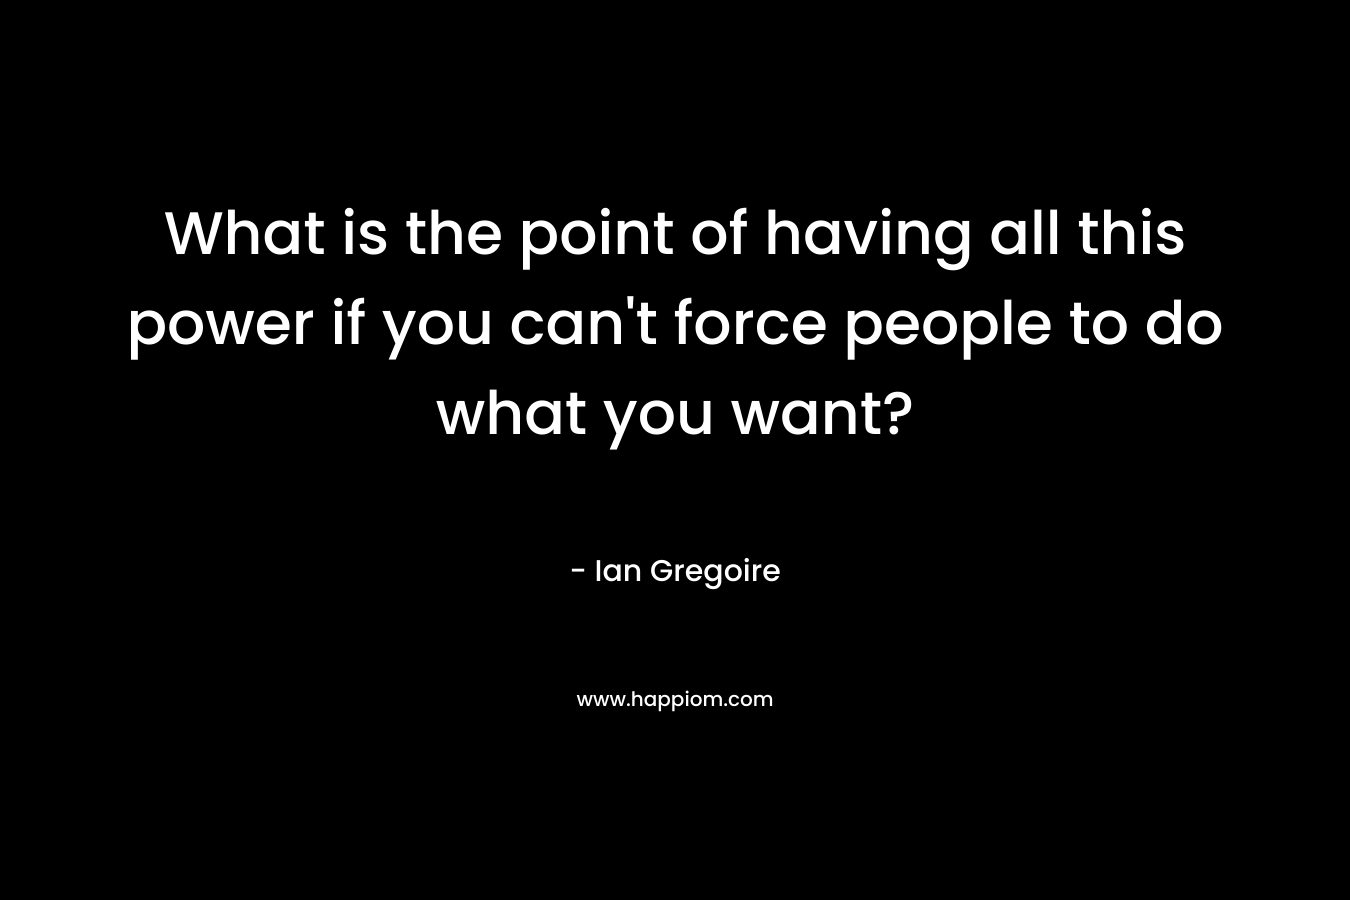 What is the point of having all this power if you can’t force people to do what you want? – Ian Gregoire